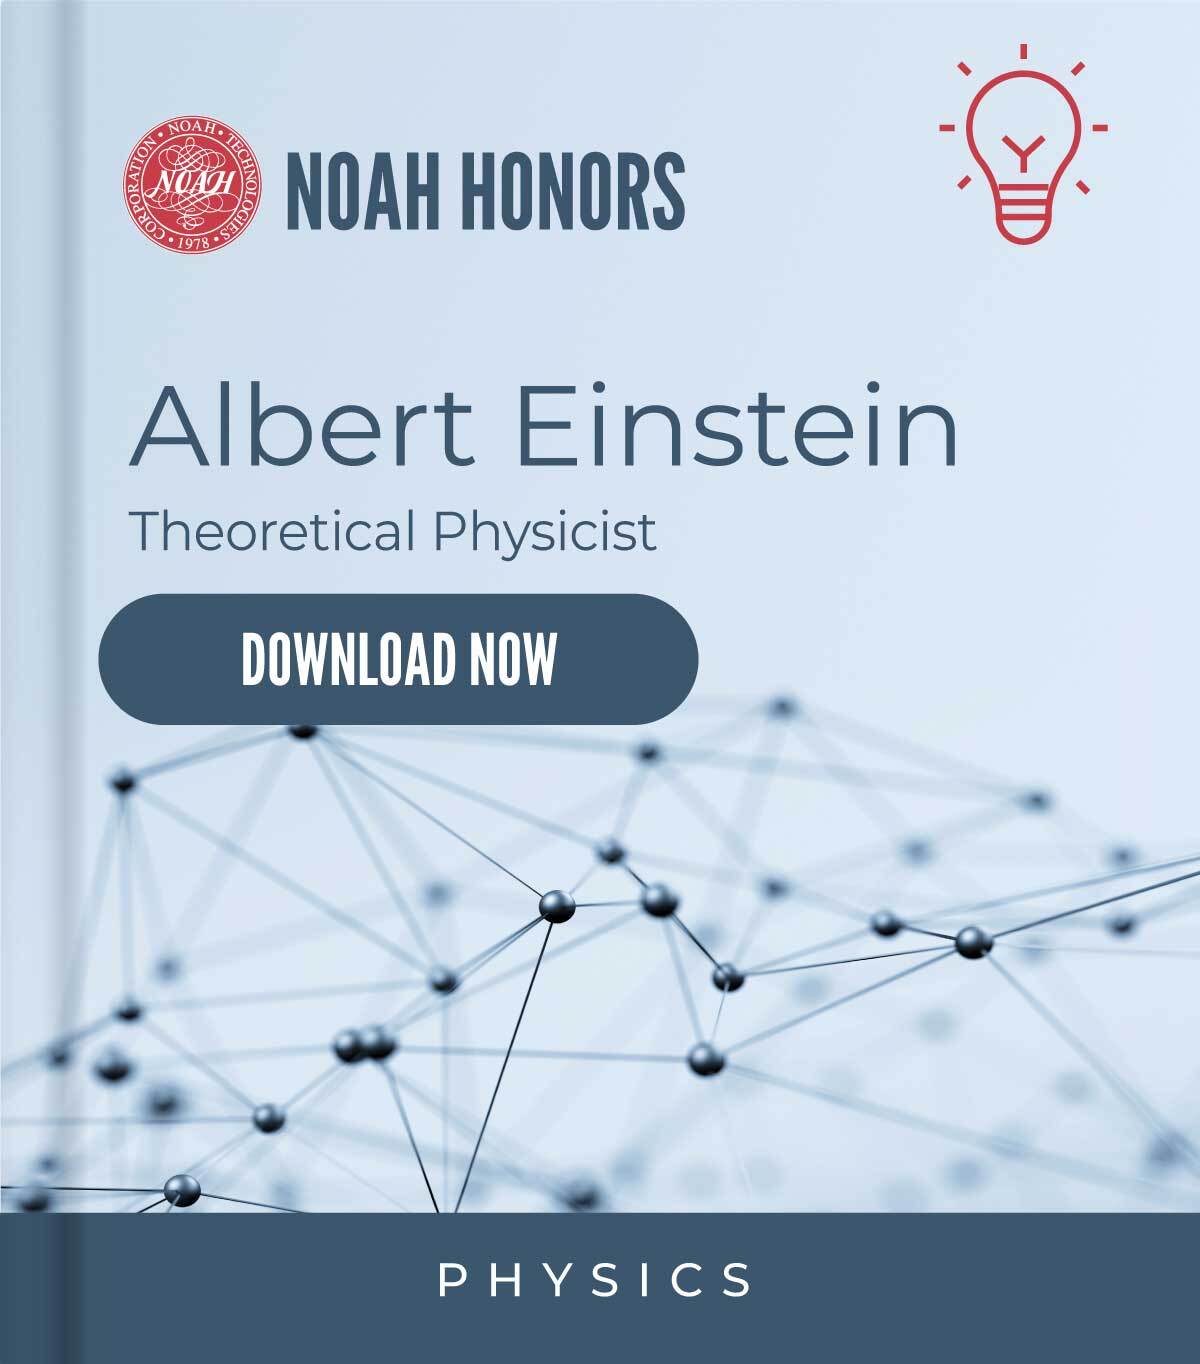 Noah honors Albert Einstein cover graphic to download white paper now